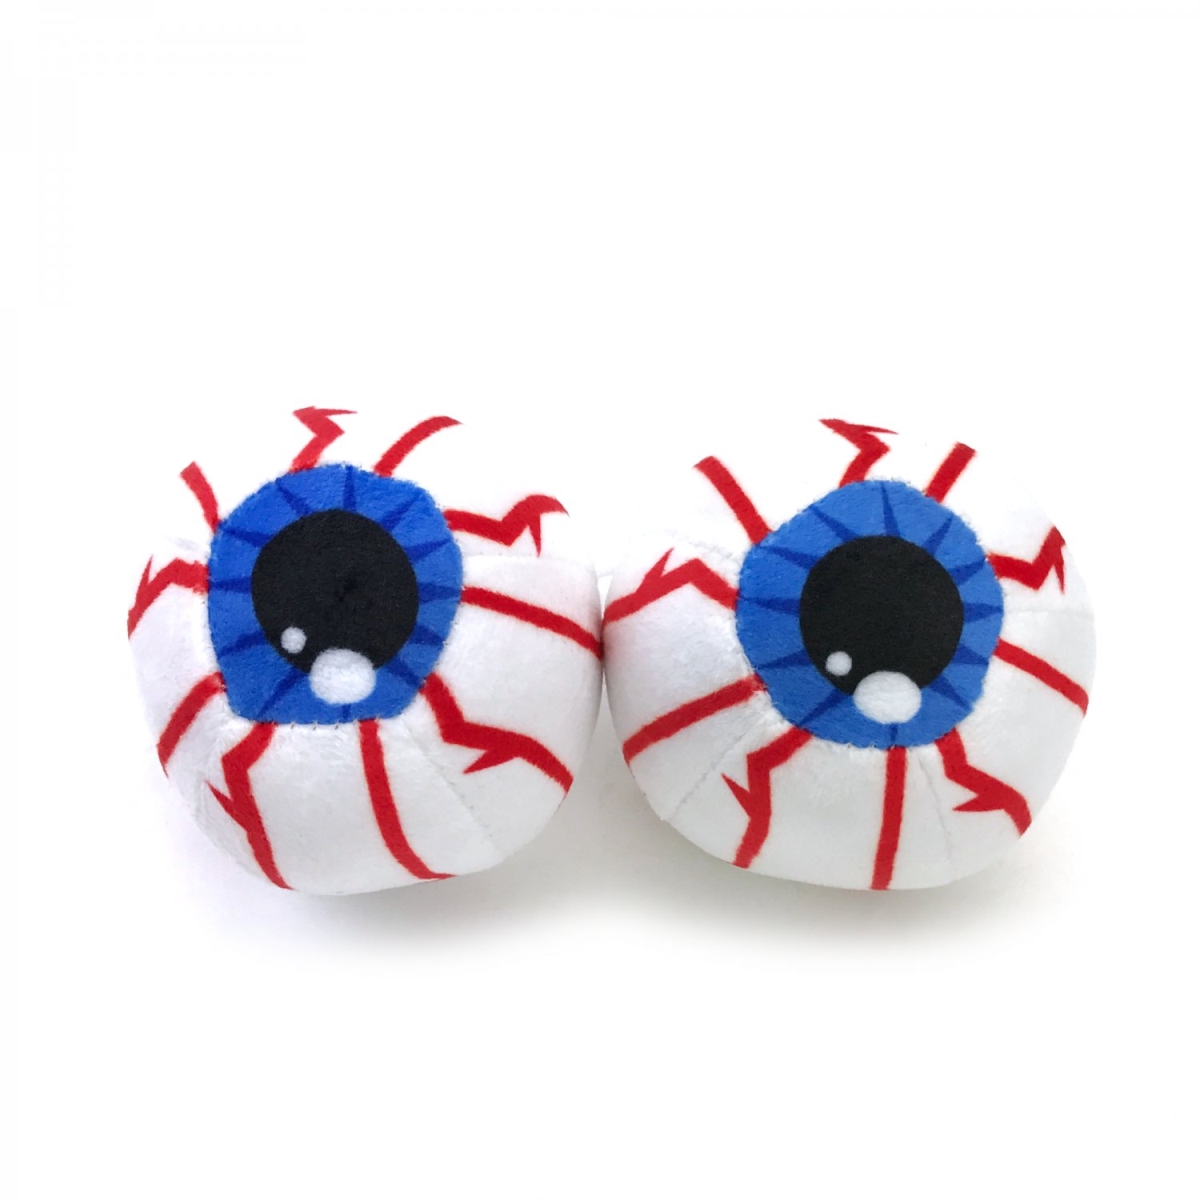 Picture of Vintage Parts USA 785537 3 Plush Stuffed Blood Shot Eye Ball Toys - Set of 2